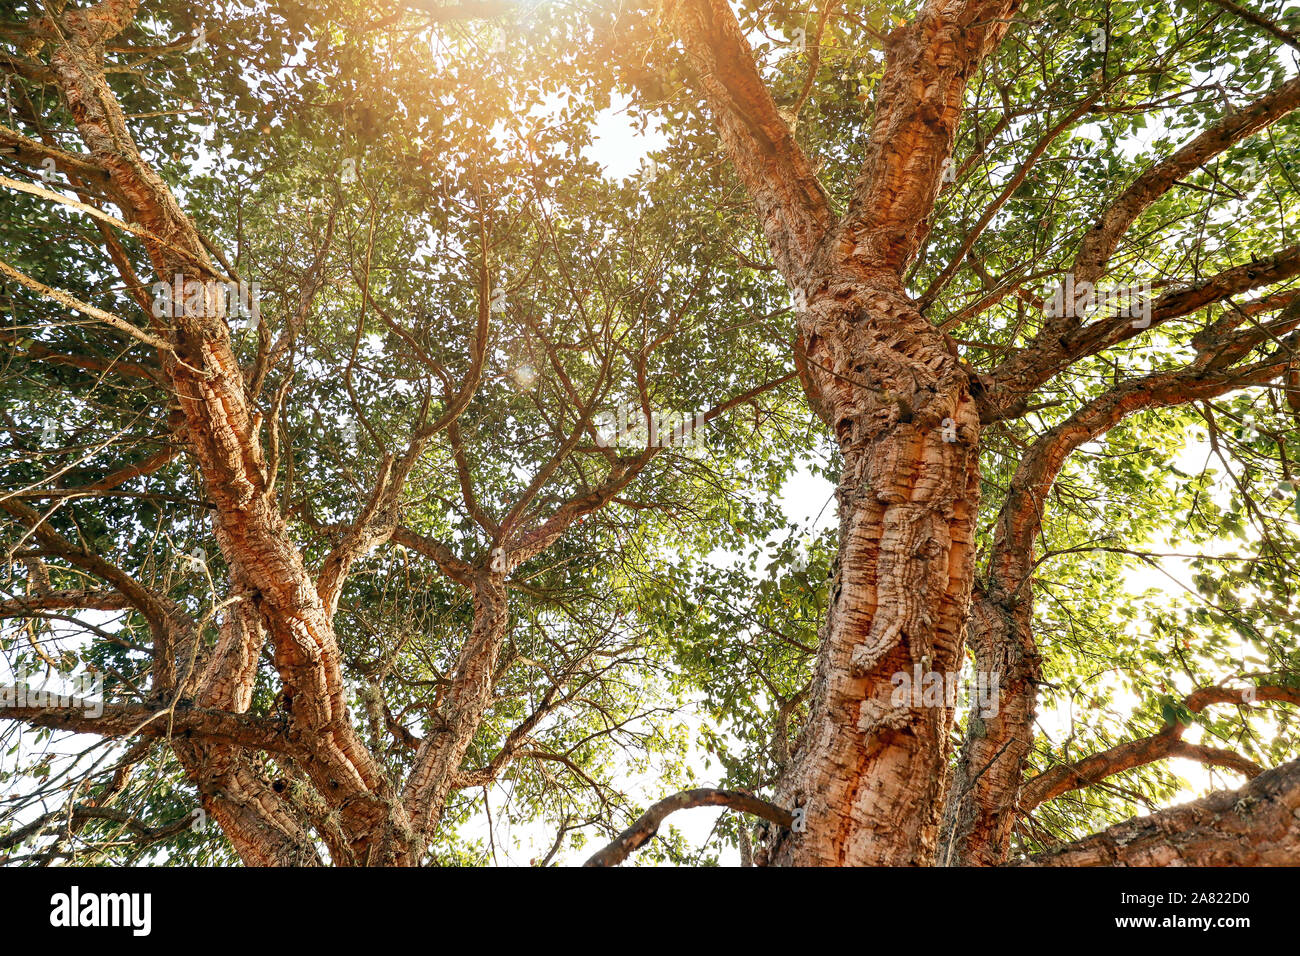 Natural trunk with bark of an old cork oak tree (Quercus suber) in portuguese landscape with evening sun, Alentejo Portugal Europe Stock Photo